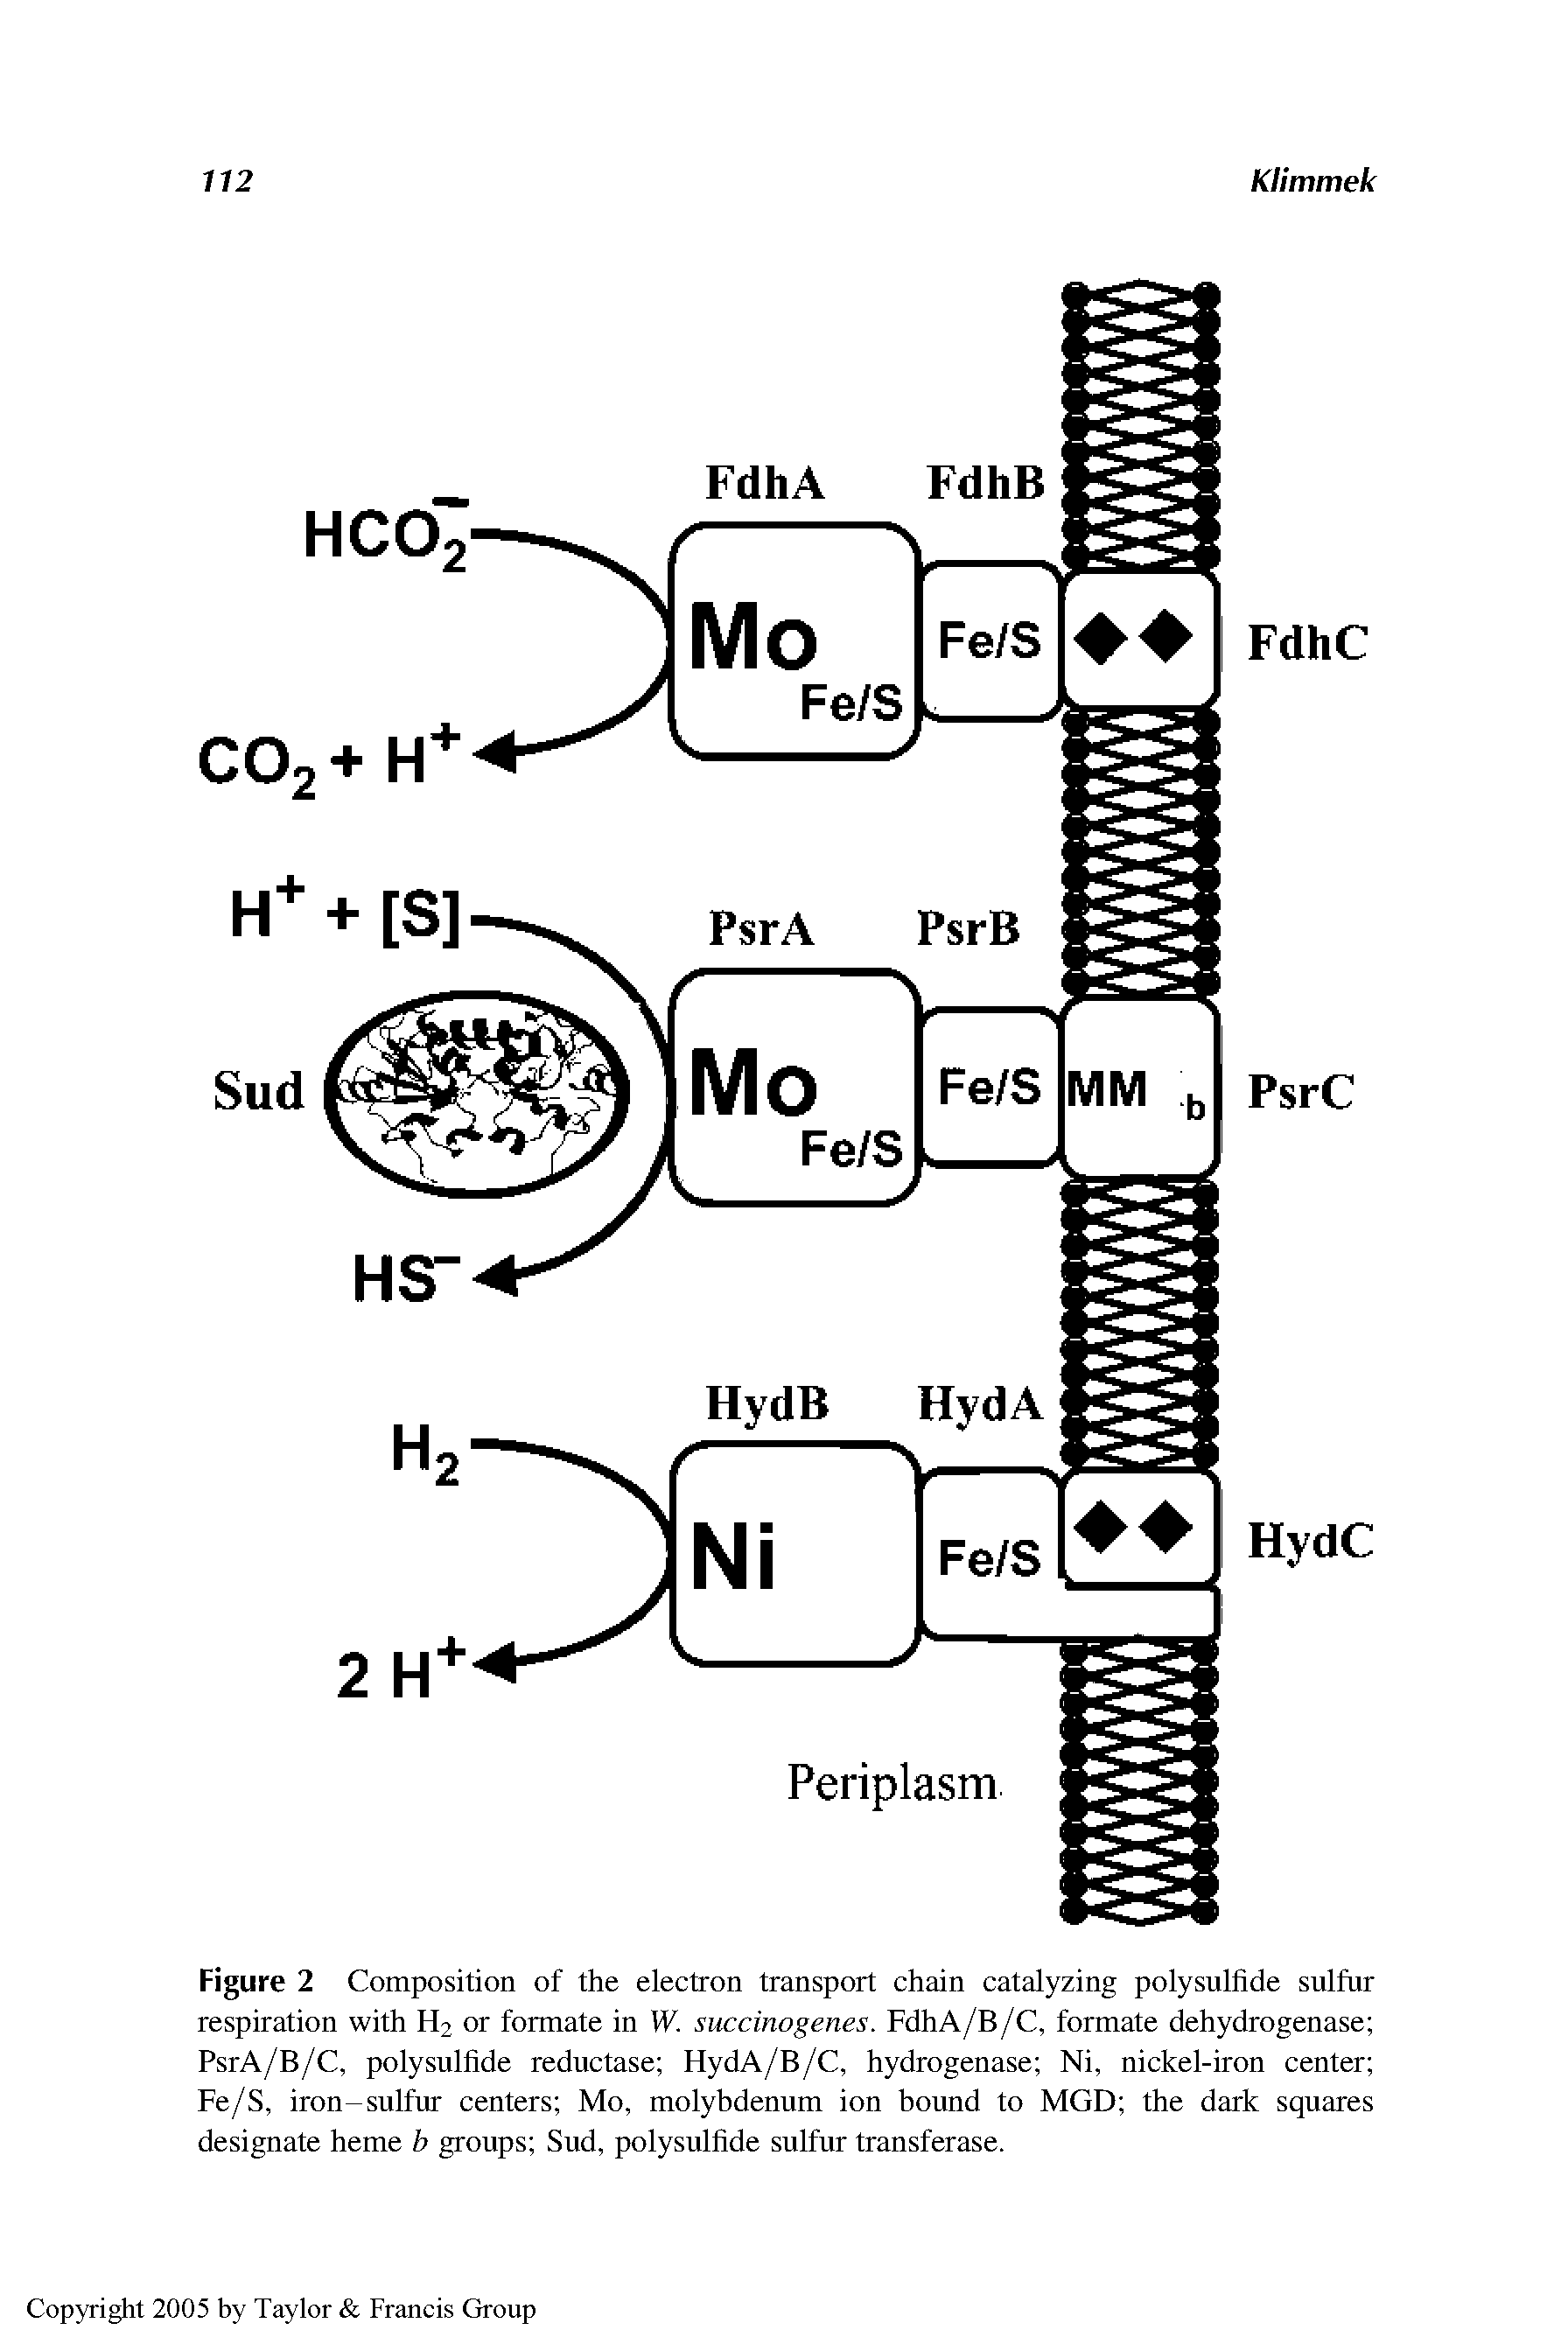 Figure 2 Composition of the electron transport chain catalyzing polysulHde sulfur respiration with H2 or formate in W. succinogenes. FdhA/B/C, formate dehydrogenase PsrA/B/C, polysulHde reductase HydA/B/C, hydrogenase Ni, nickel-iron center Fe/S, iron-sulfur centers Mo, molybdenum ion bound to MGD the dark squares designate heme b groups Sud, polysulfide sulfur transferase.